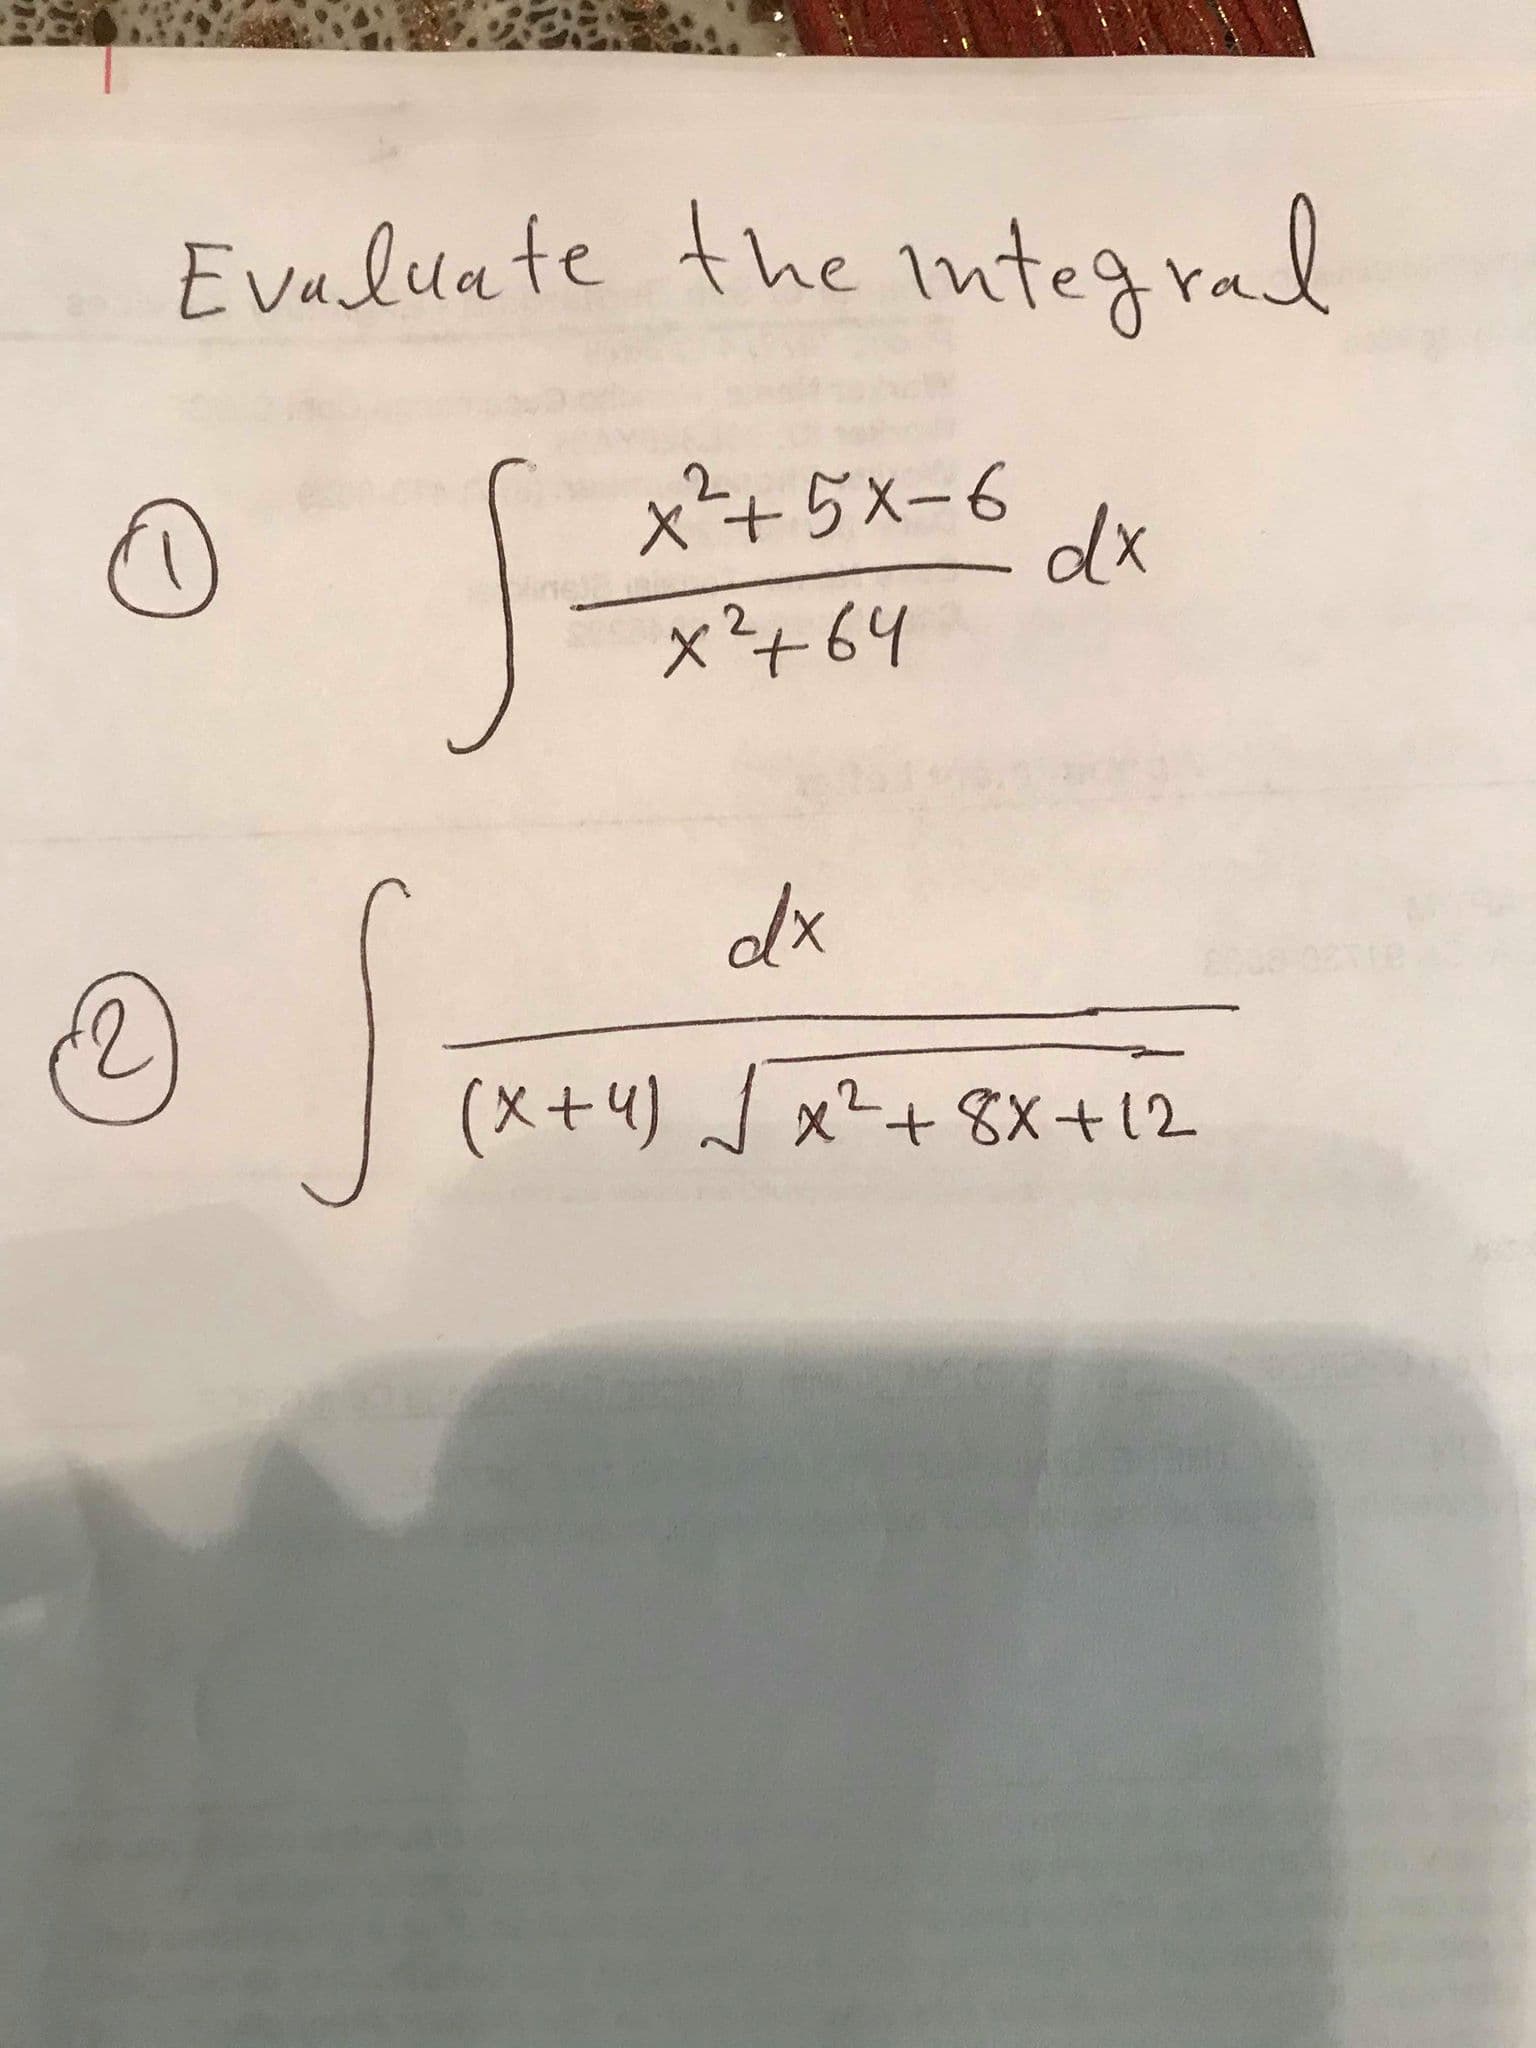 Evaluate the Integral
X+5X-6
dx
x464
